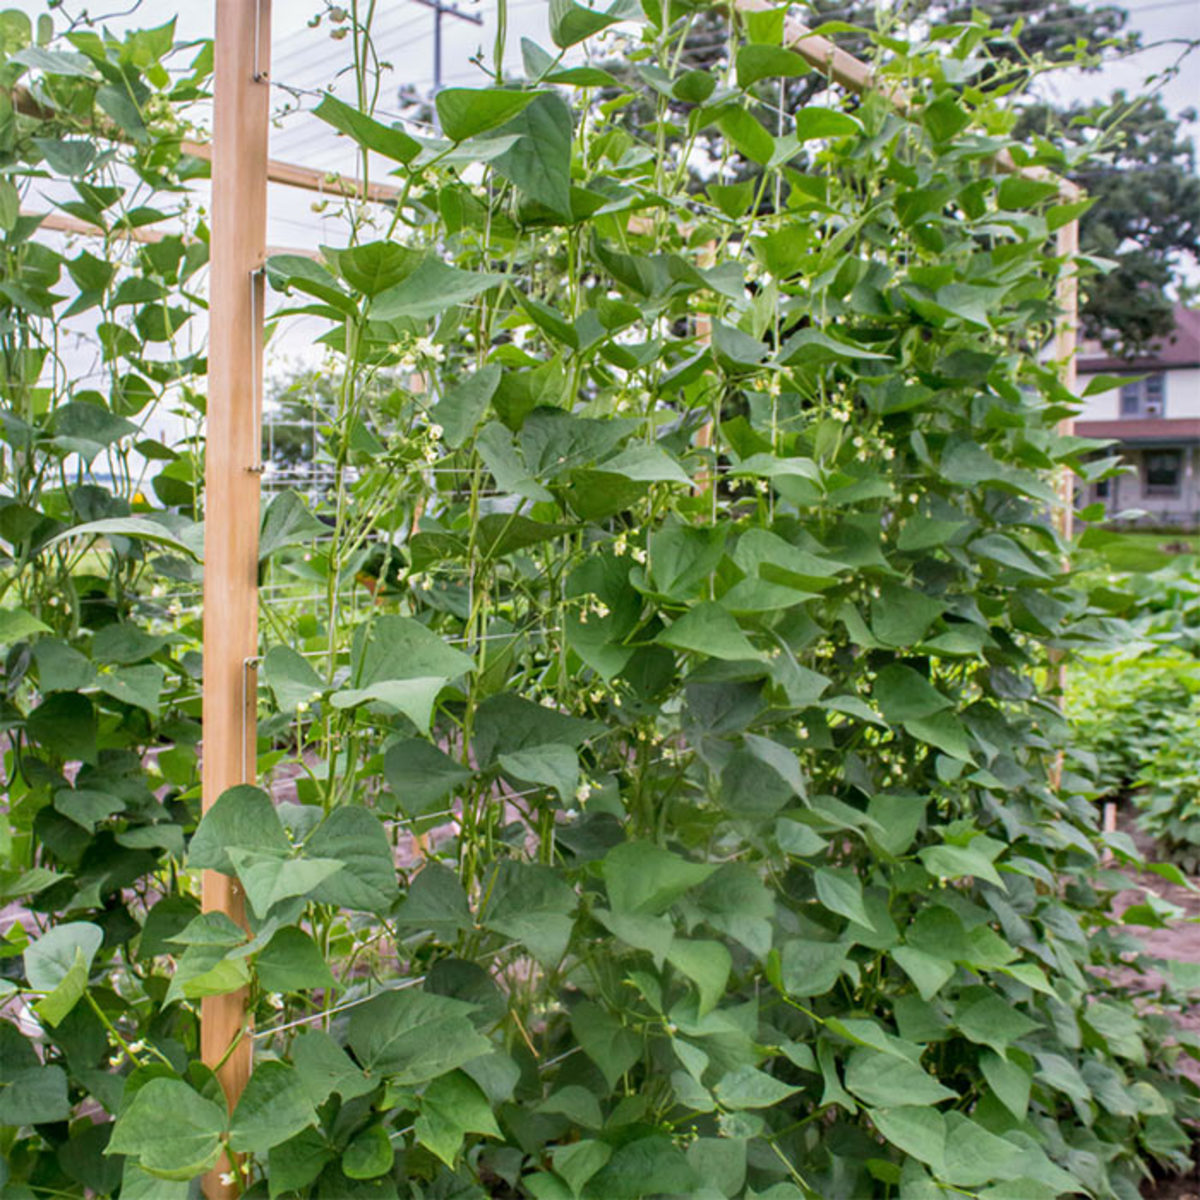 A pole bean like this variety, 'Seychelles', needs a trellis or other support to climb.